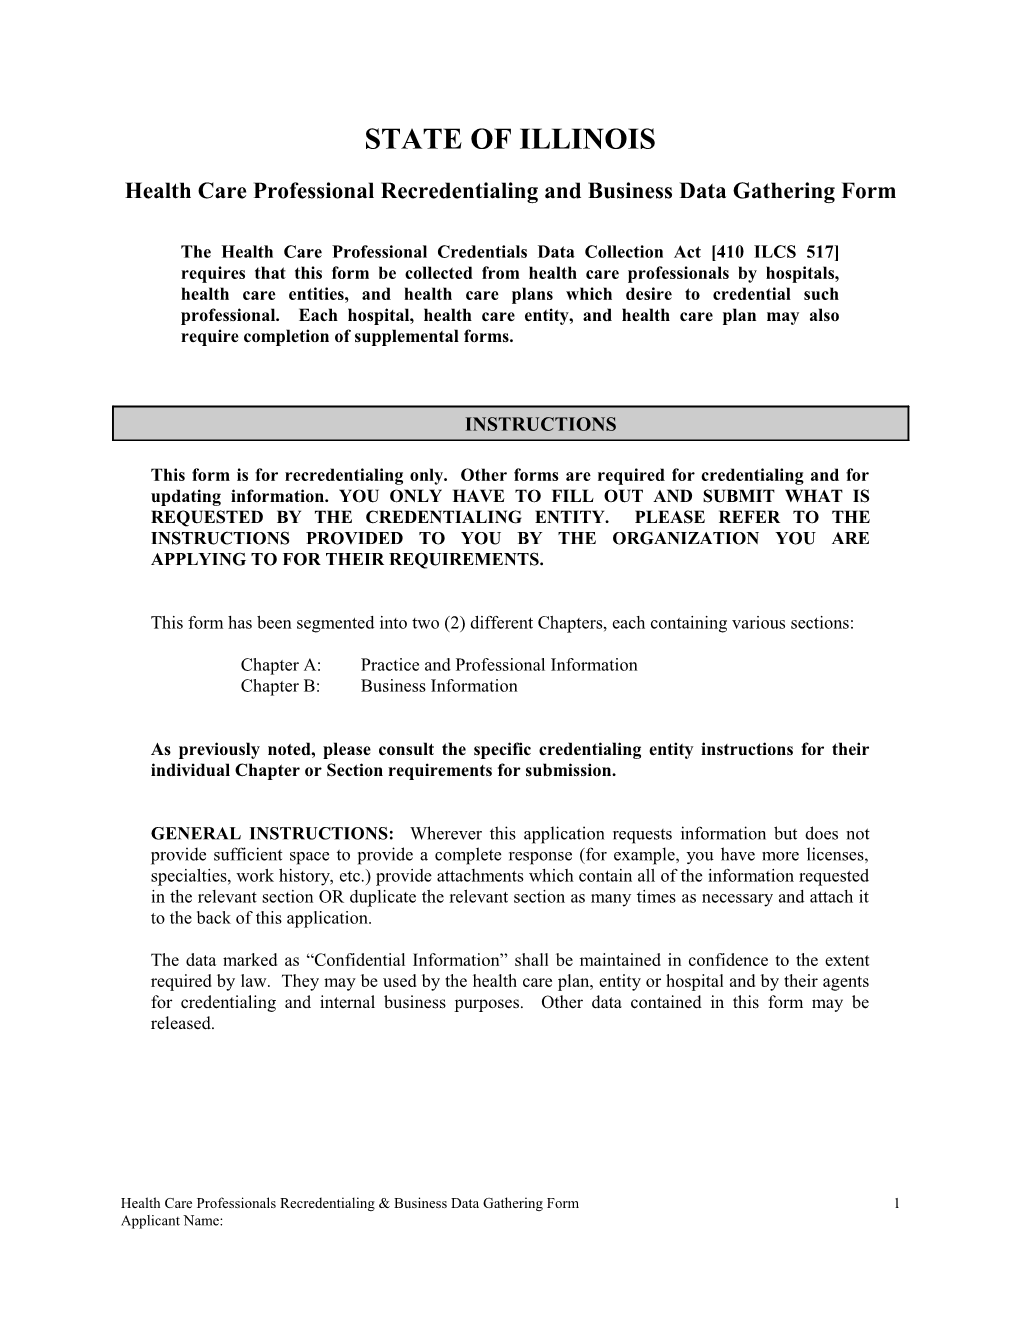 Health Care Professional Recredentialing and Business Data Gathering Form